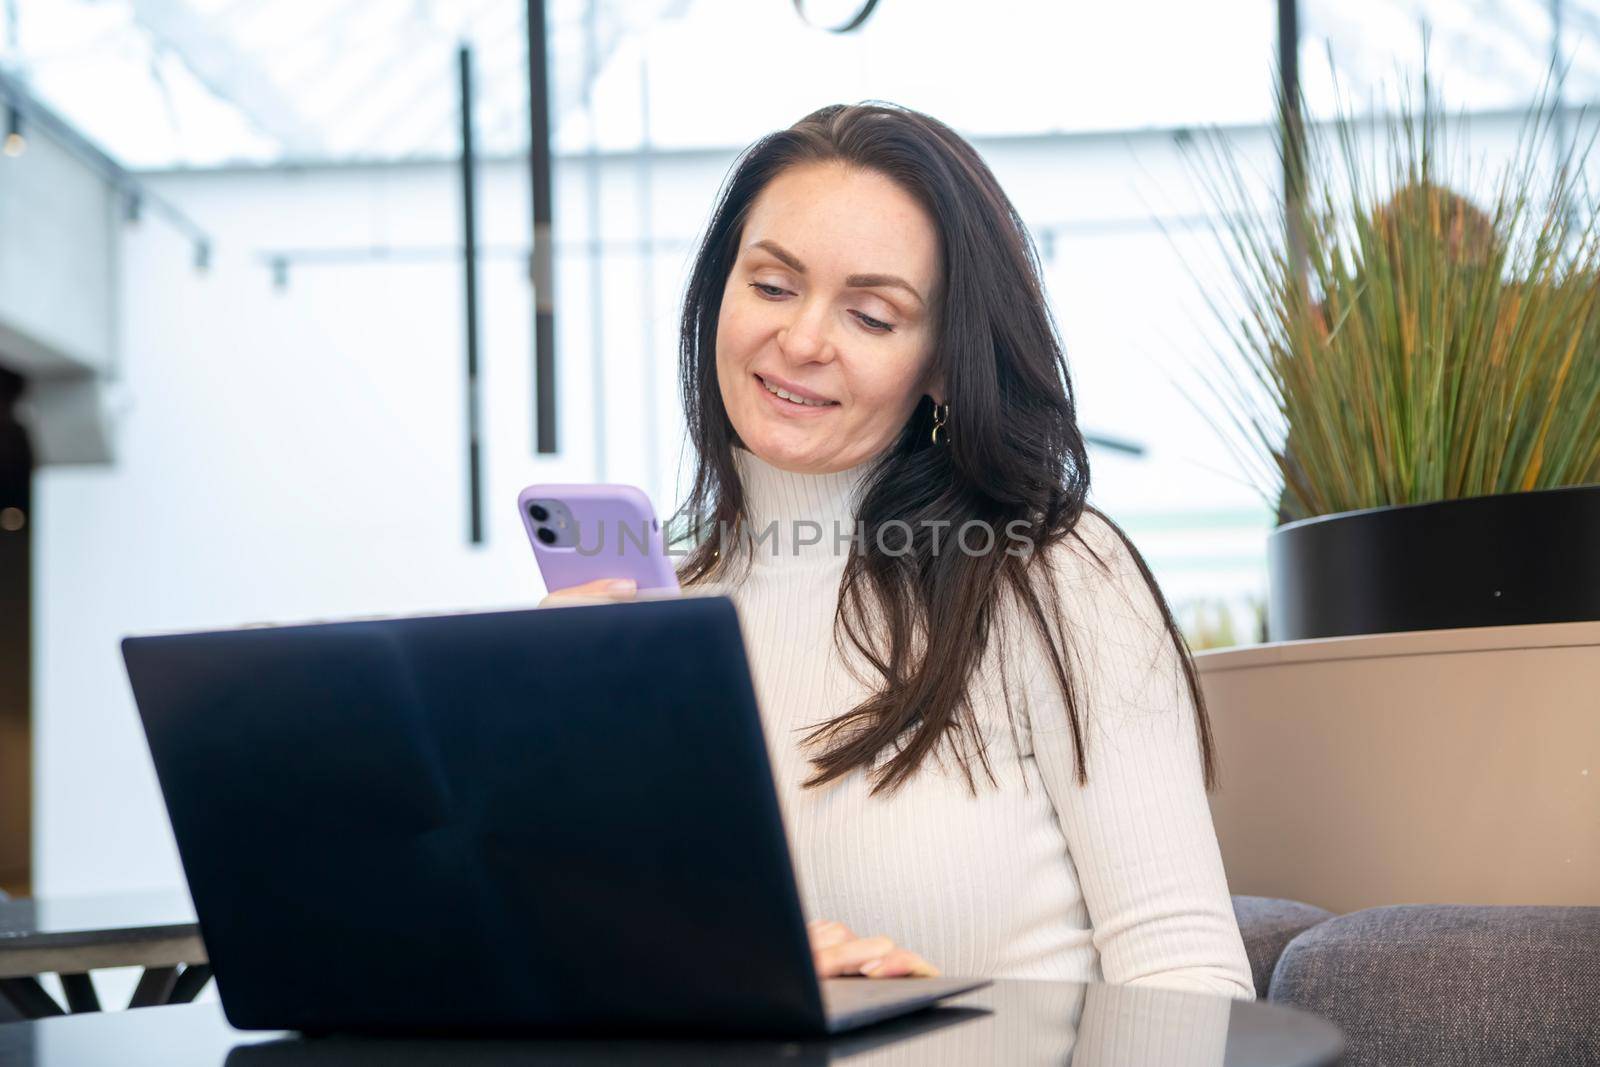 young woman works on laptop and smartphone in cafe.